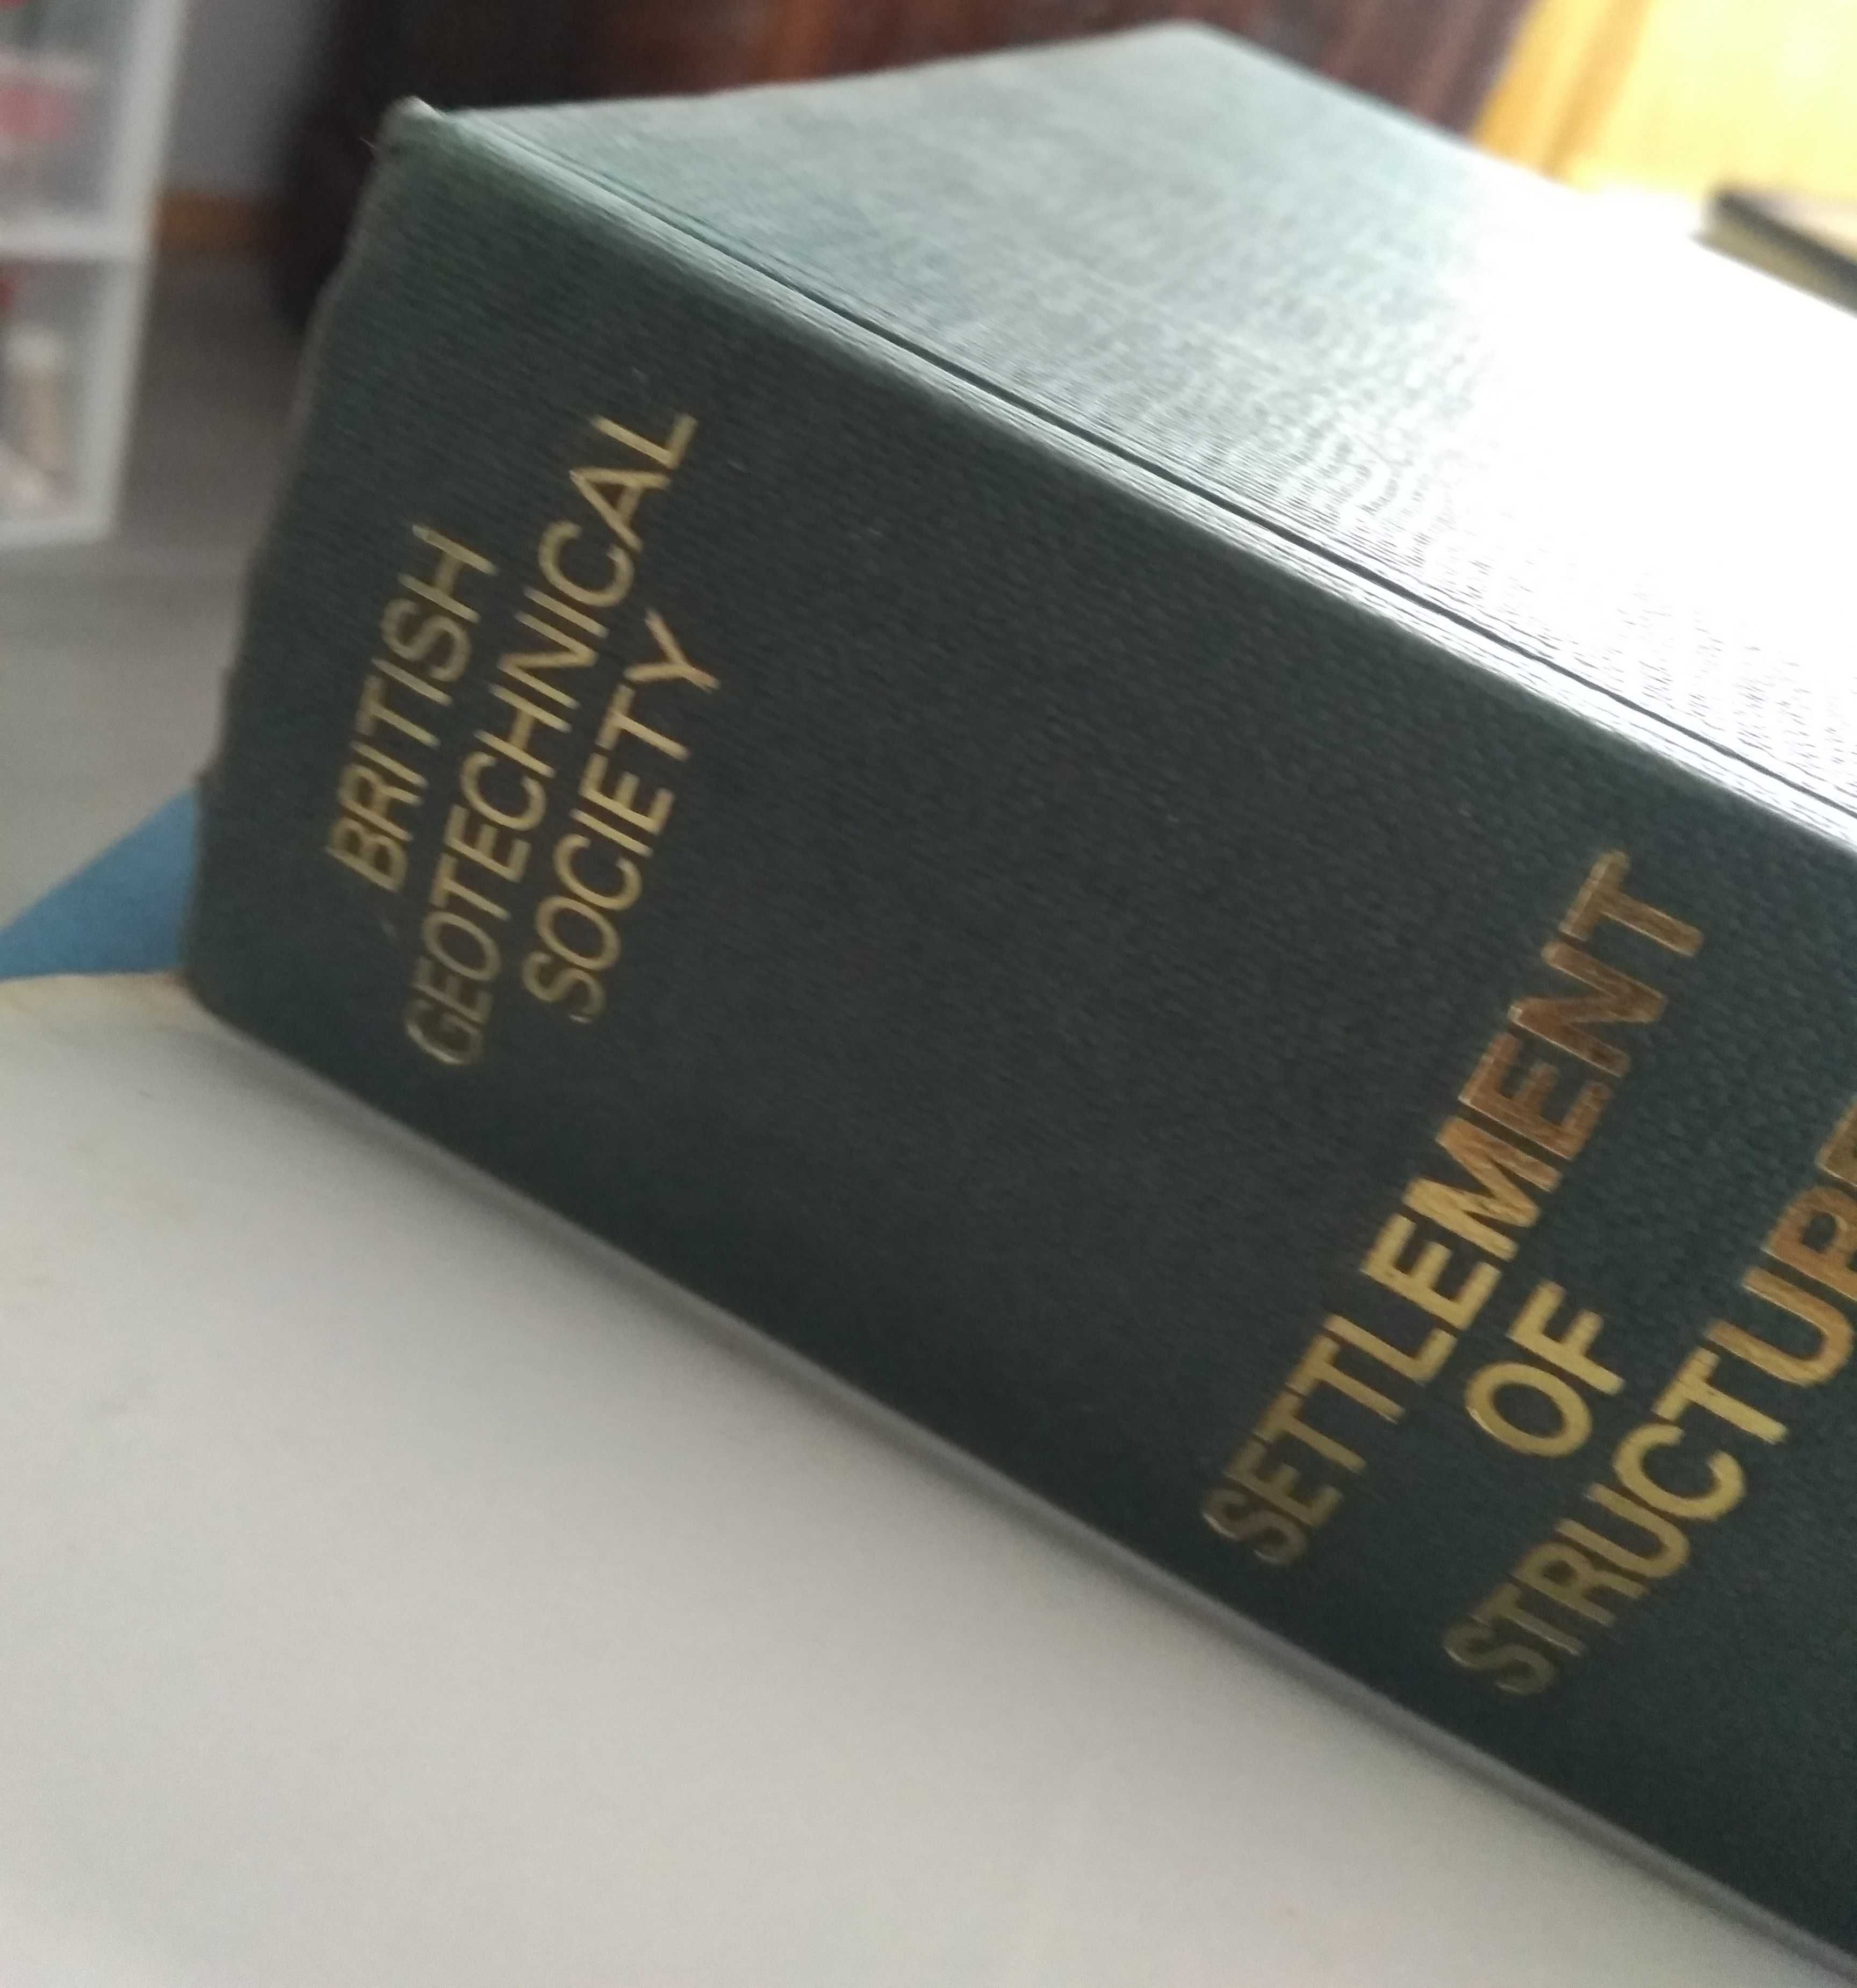 Livro Técnico Settlement of Strucutures – British Geotechnical Society